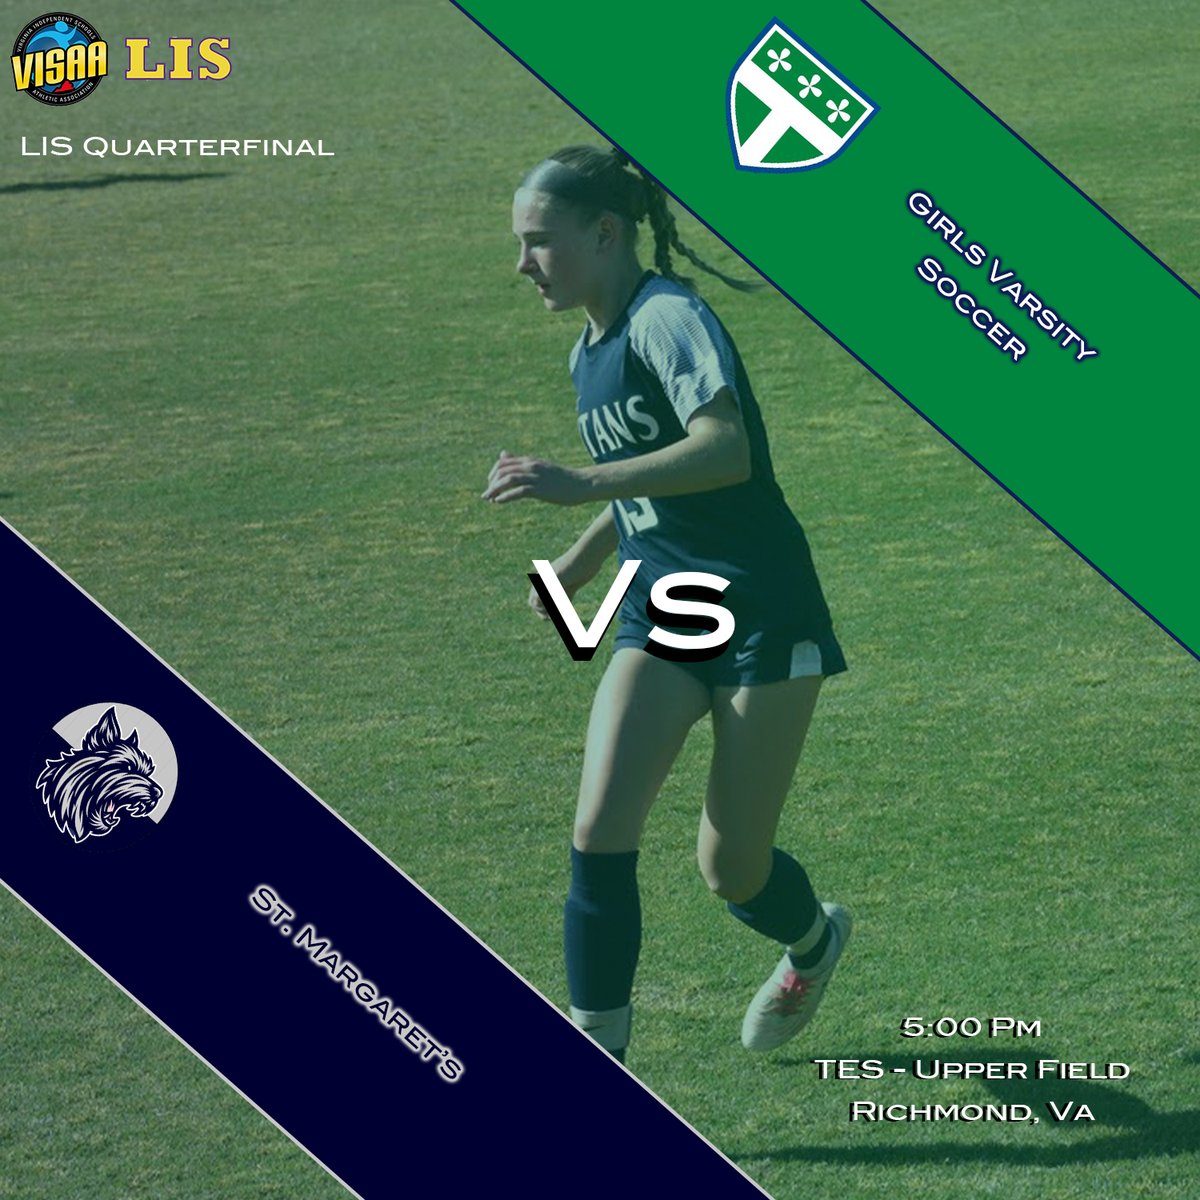 Let's try this again! #5 (#2 LIS) Girls soccer take on (#7 LIS) St. Margaret's in a reschedule from yesterday to open the LIS tournament. Come out to the upper field Let's Go Titans!